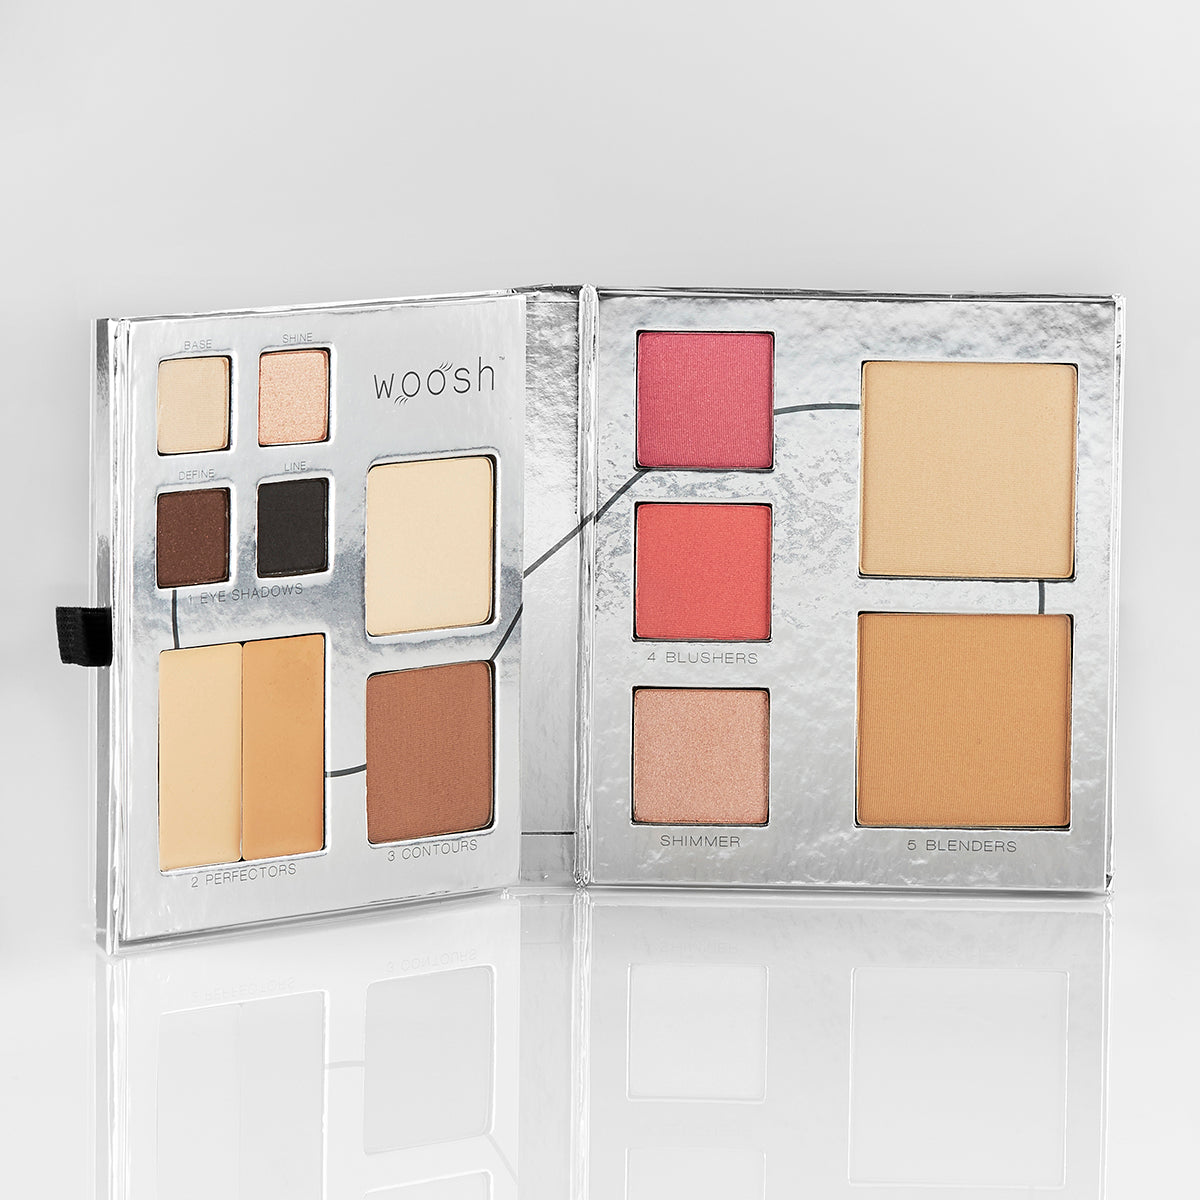 Fold out face palette with step by step instruction of how to apply the makeup included on the palette. It features four eyeshadows, 2 shades of creamy concealers, 2 contour powders in light and dark shades, 2 blushes in pink & coral, 2 shades of foundation powder and 1 shimmery highlighter